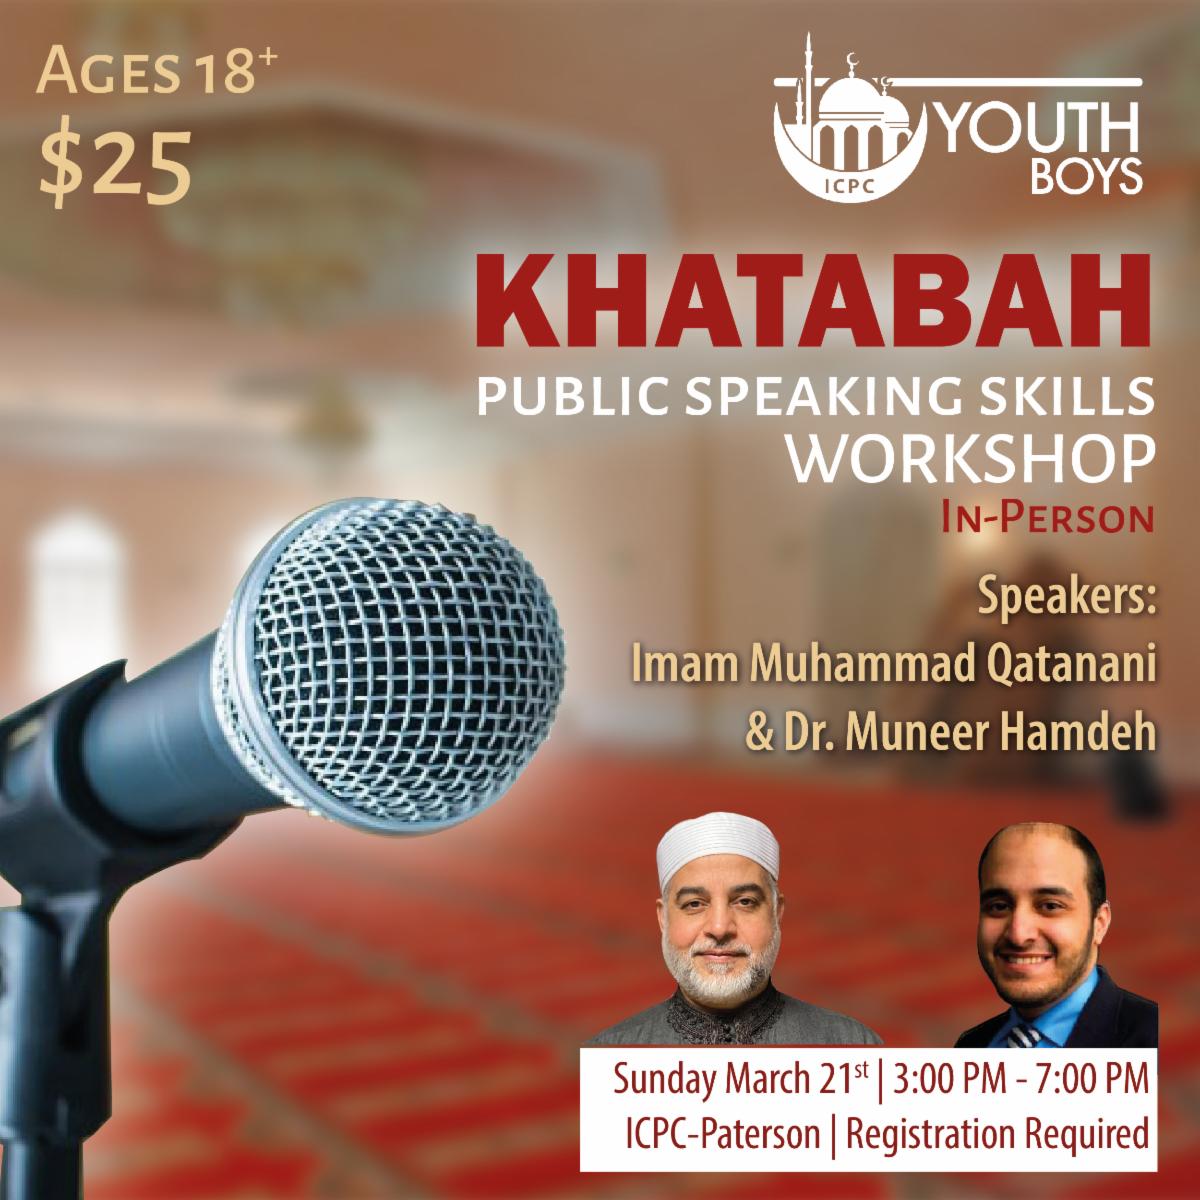 Register TODAY for our Khatabak public speaking skills Workshop
Some of the topic included:
- The importance of Khatabah in Islam
- The most important public speaking skills
Register through conta.cc/3eBNTab
#khatabah #publickspeaking #workshop